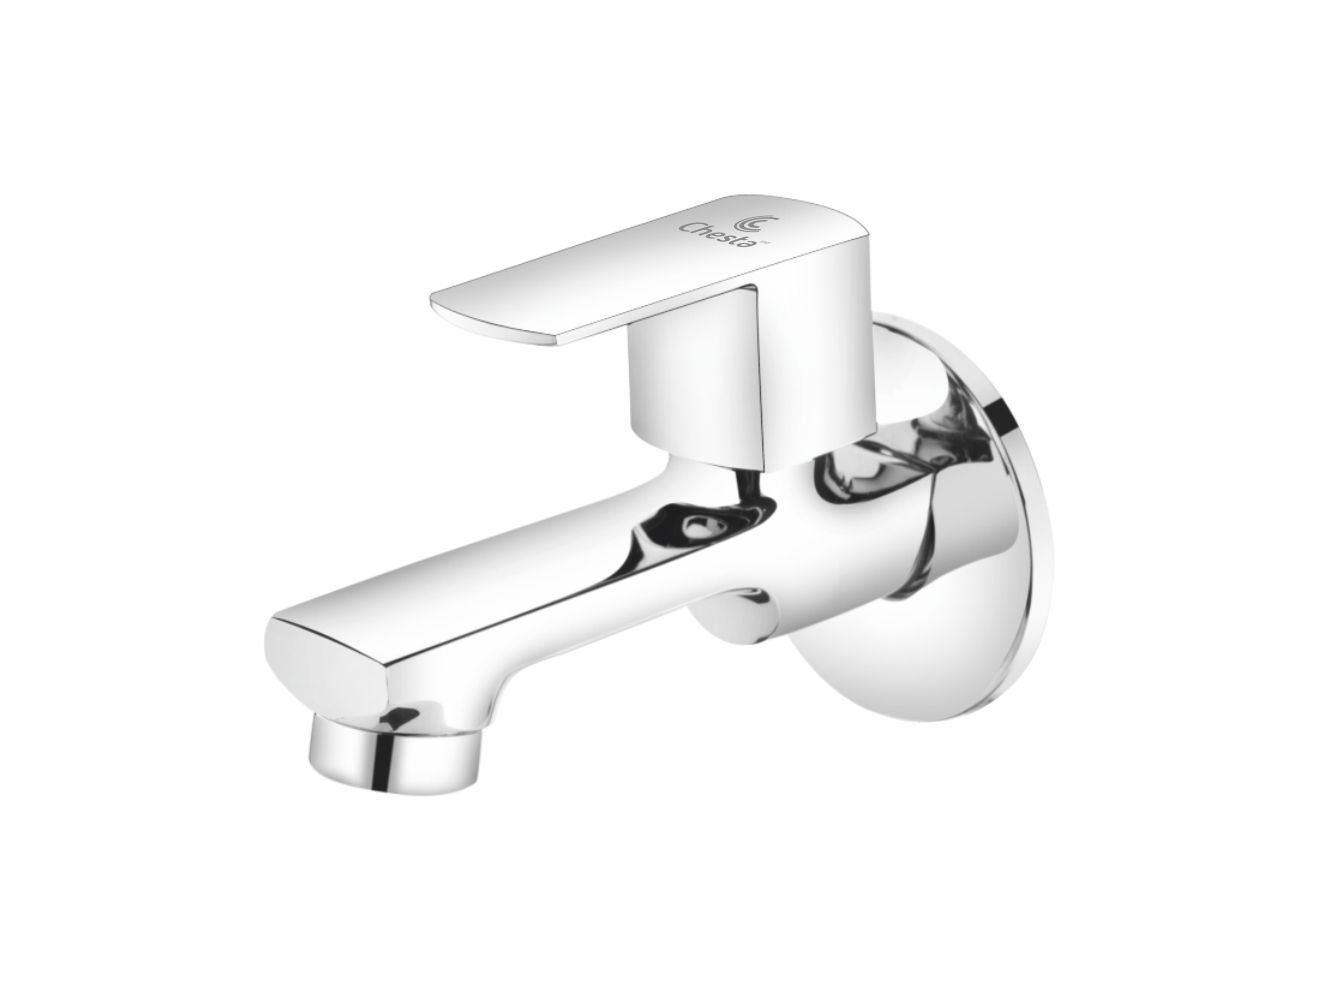 BL - 1001 - Bib Cock with Wall Flange at Chesta Bath Fittings